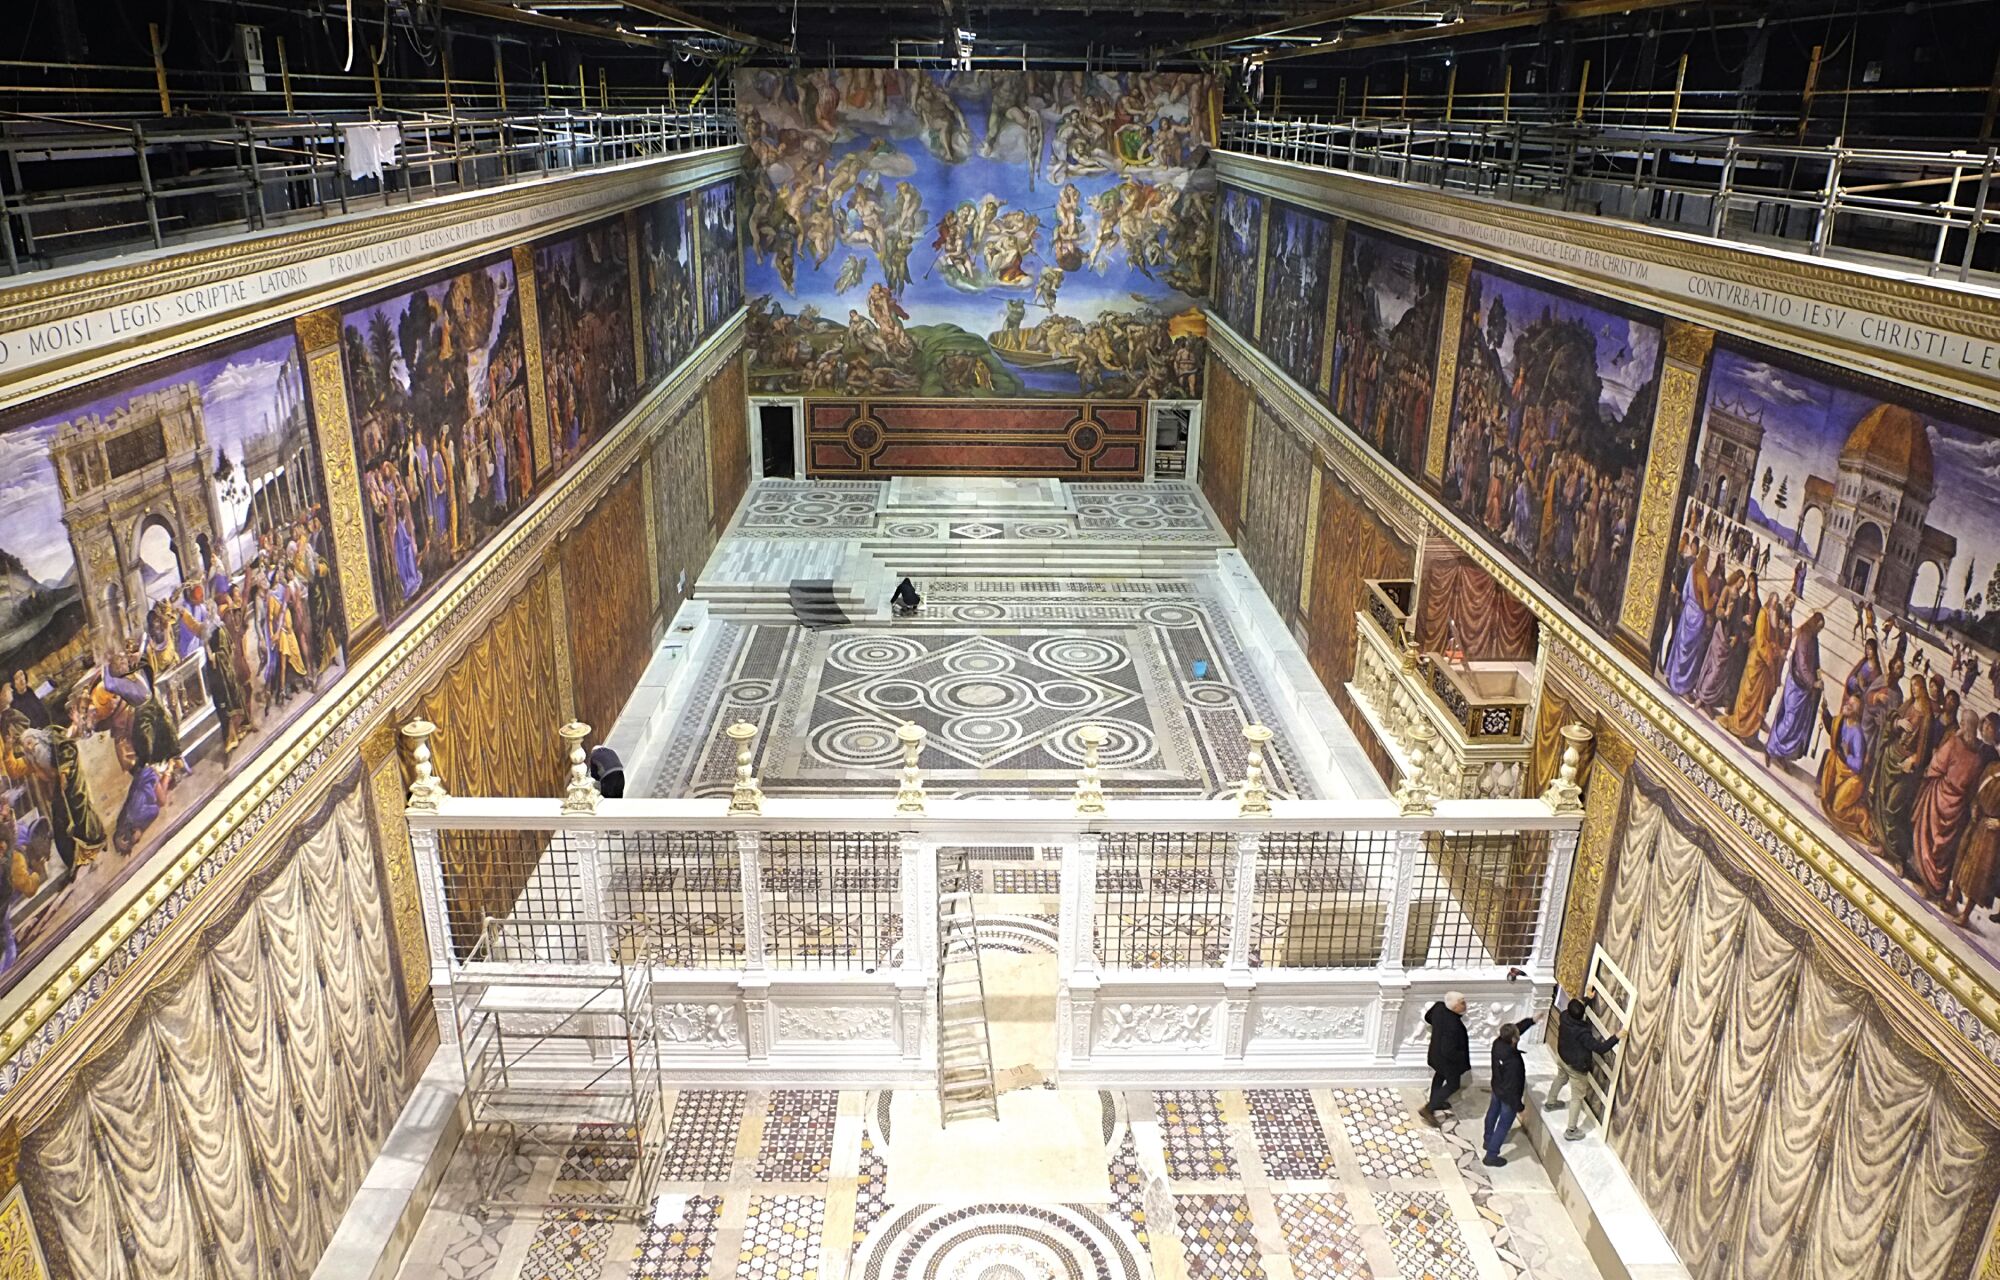 "We can technically say that we made the bigger Sistine Chapel," joked "The Two Popes" production designer Mark Tildesley.